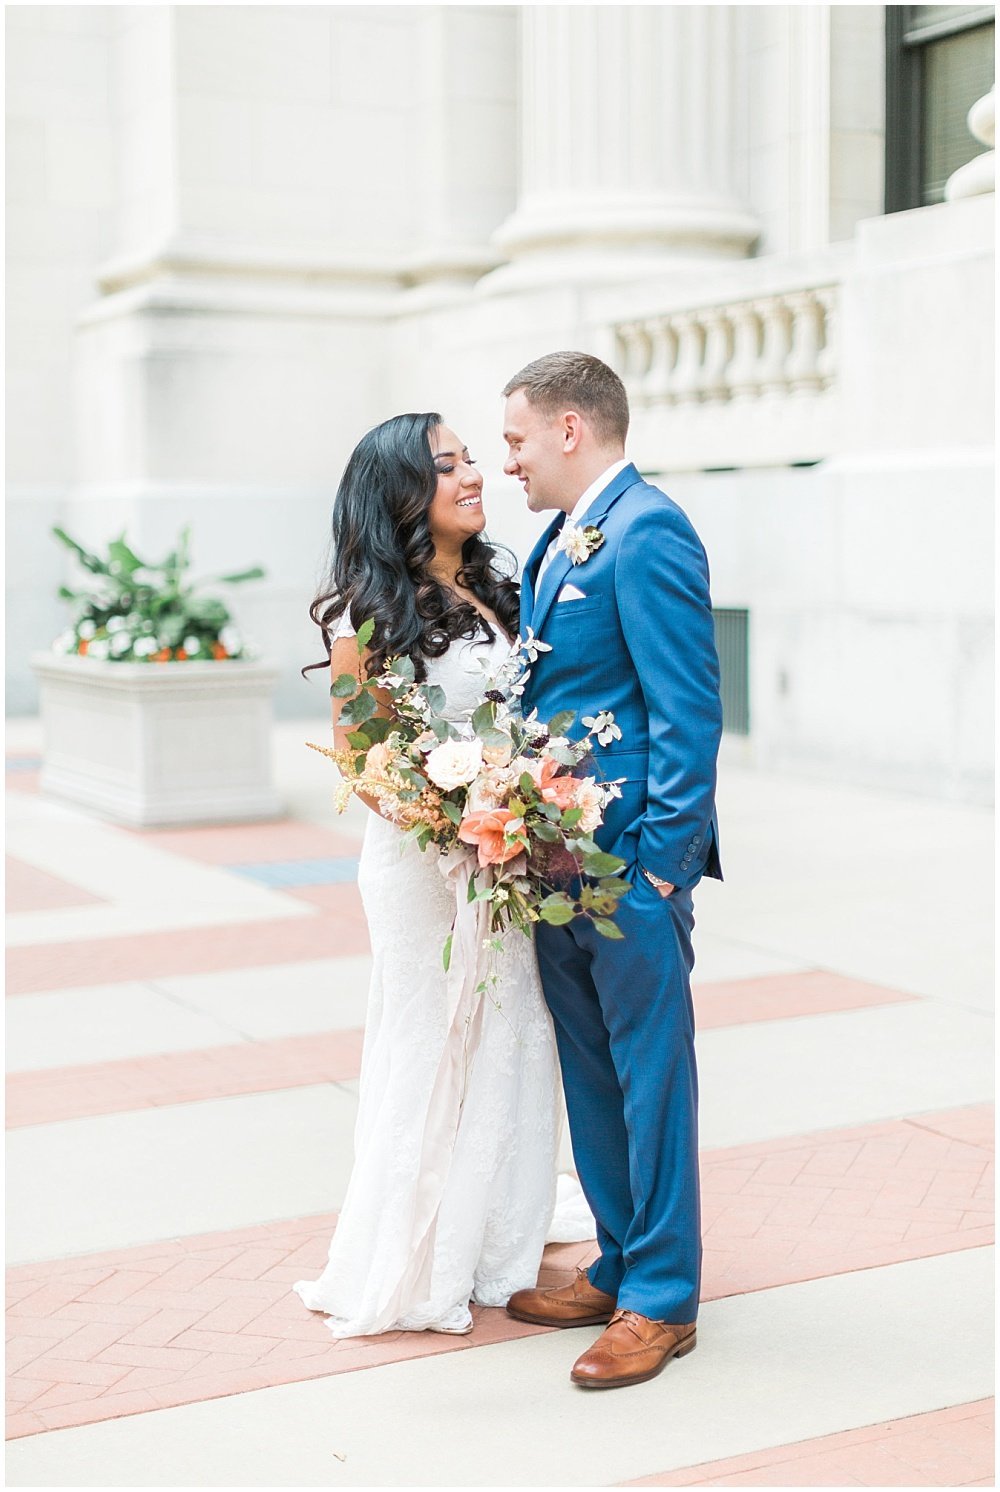 Summer-Mexican-Inspired-Gold-And-Floral-Crowne-Plaza-Indianapolis-Downtown-Union-Station-Wedding-Cory-Jackie-Wedding-Photographers-Jessica-Dum-Wedding-Coordination_photo___0046